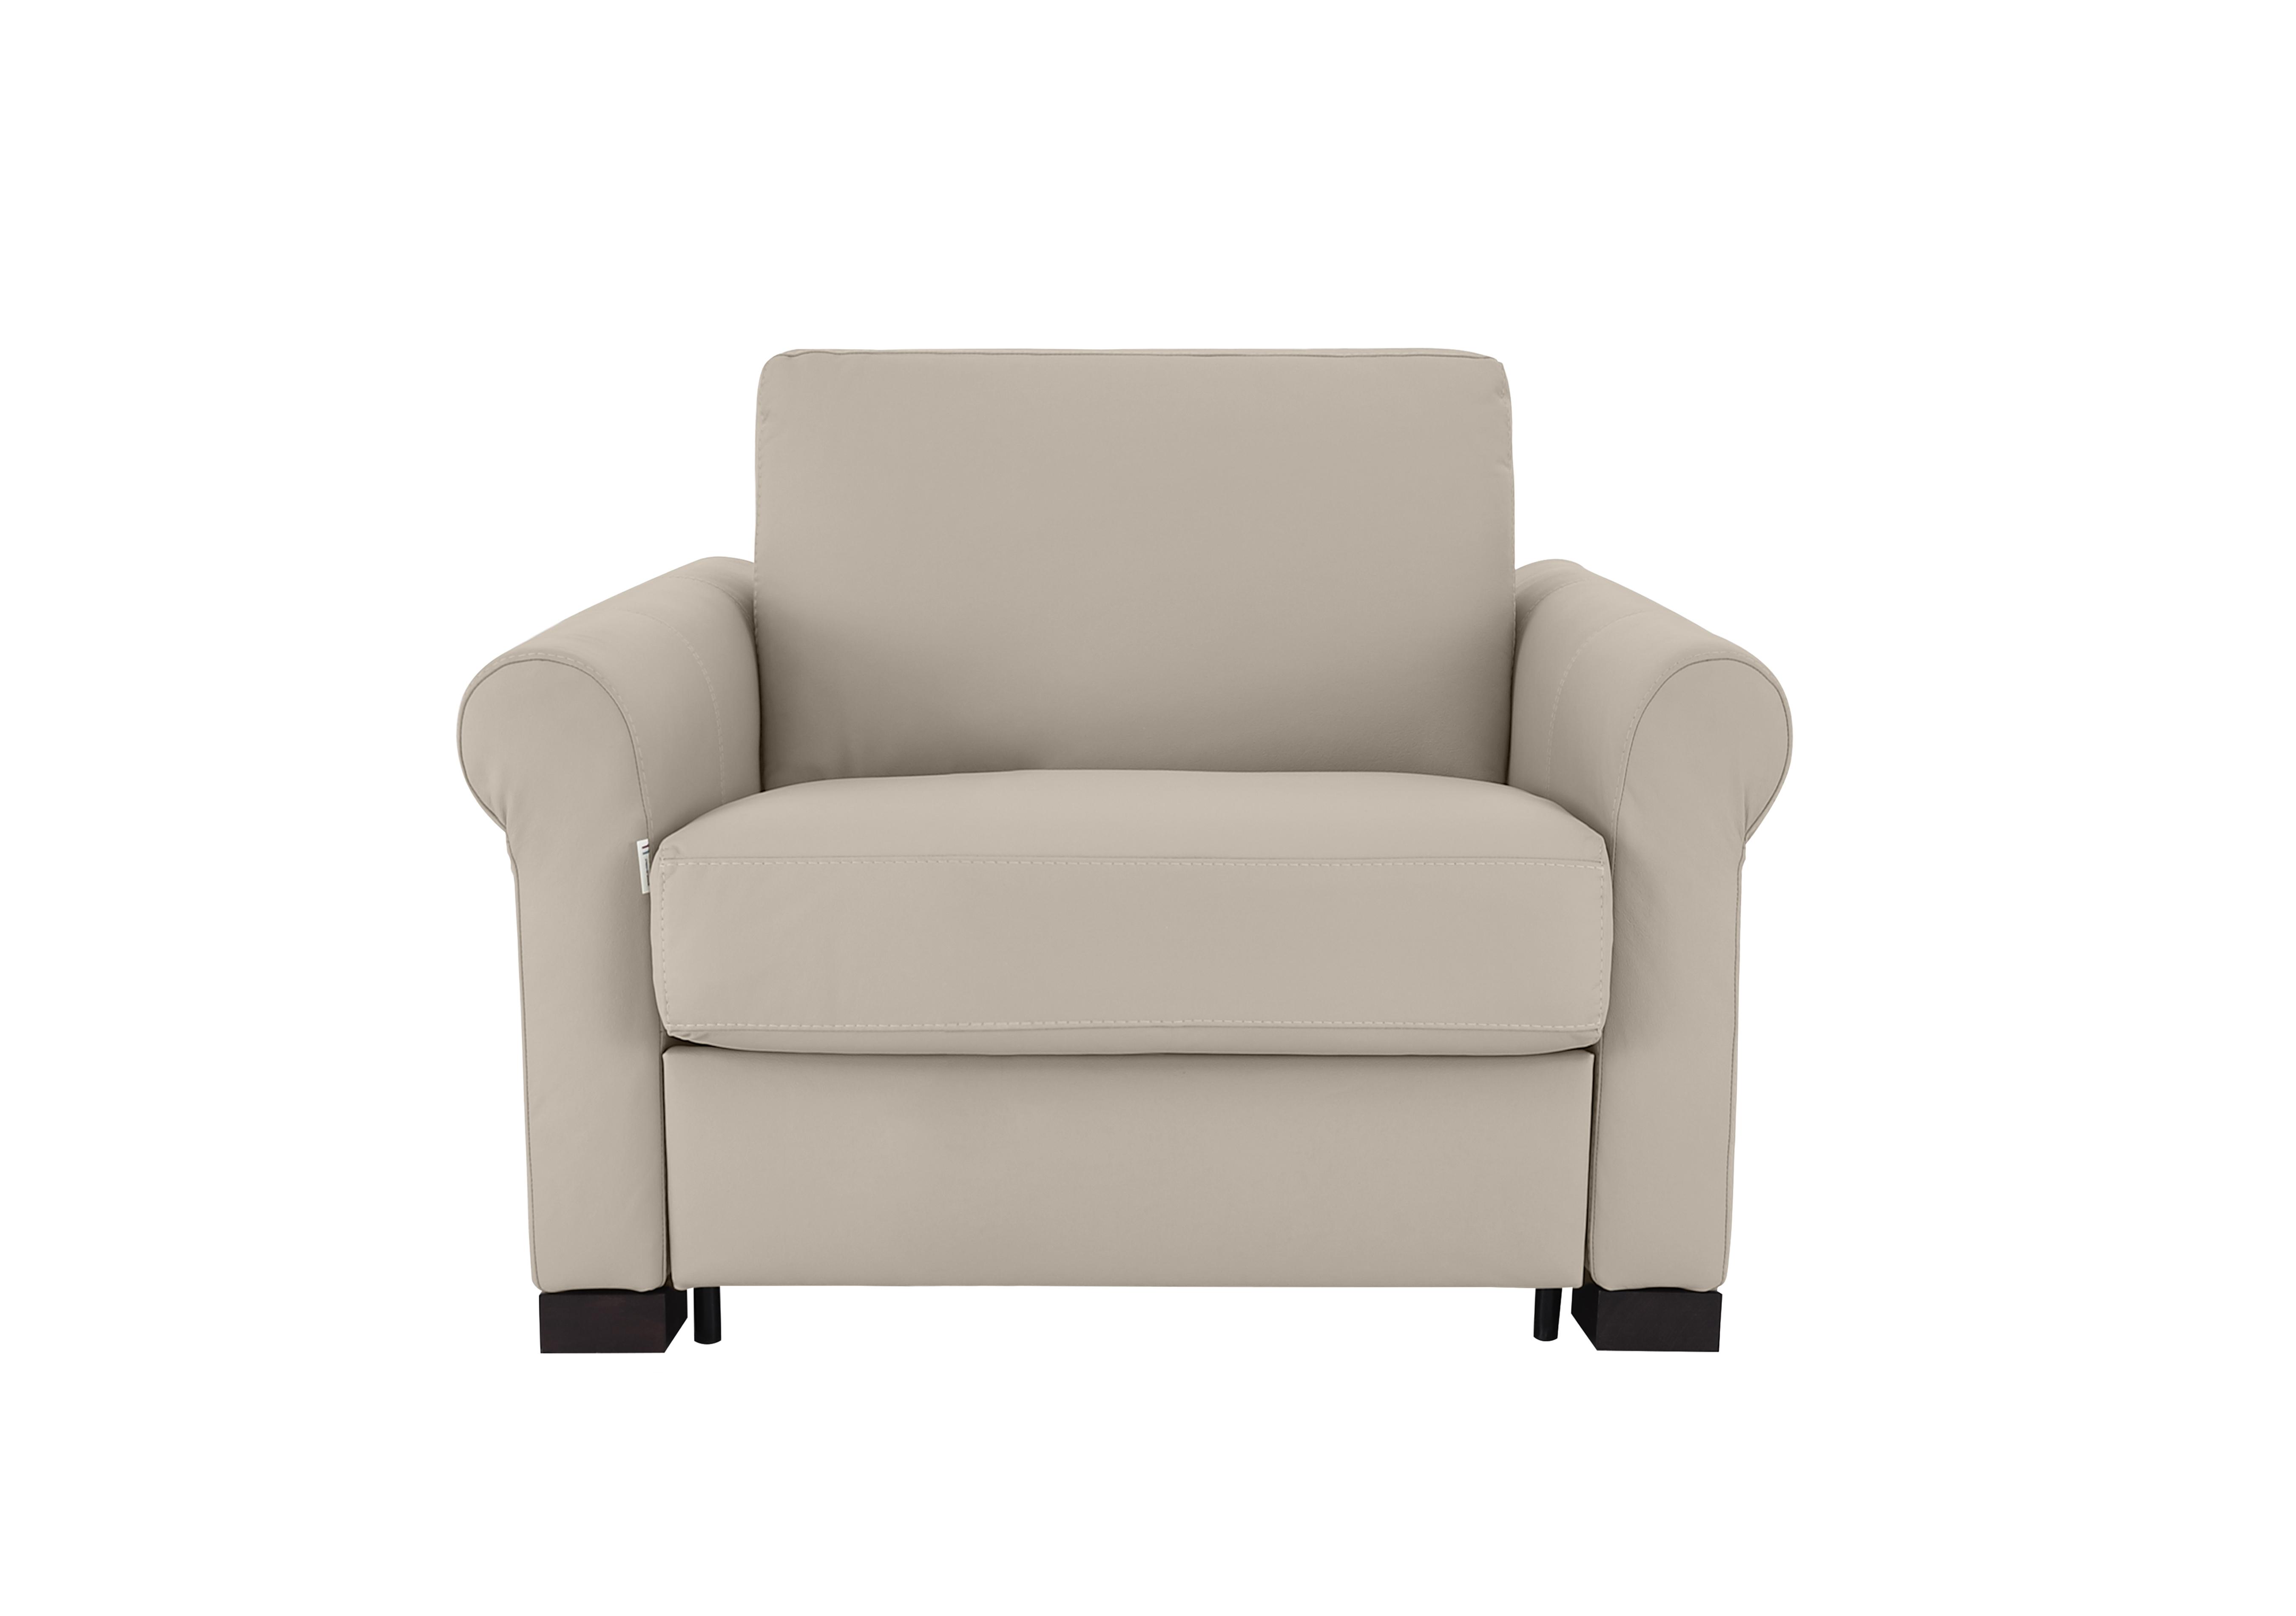 Alcova Leather Chair Sofa Bed with Scroll Arms in Botero Crema 2156 on Furniture Village